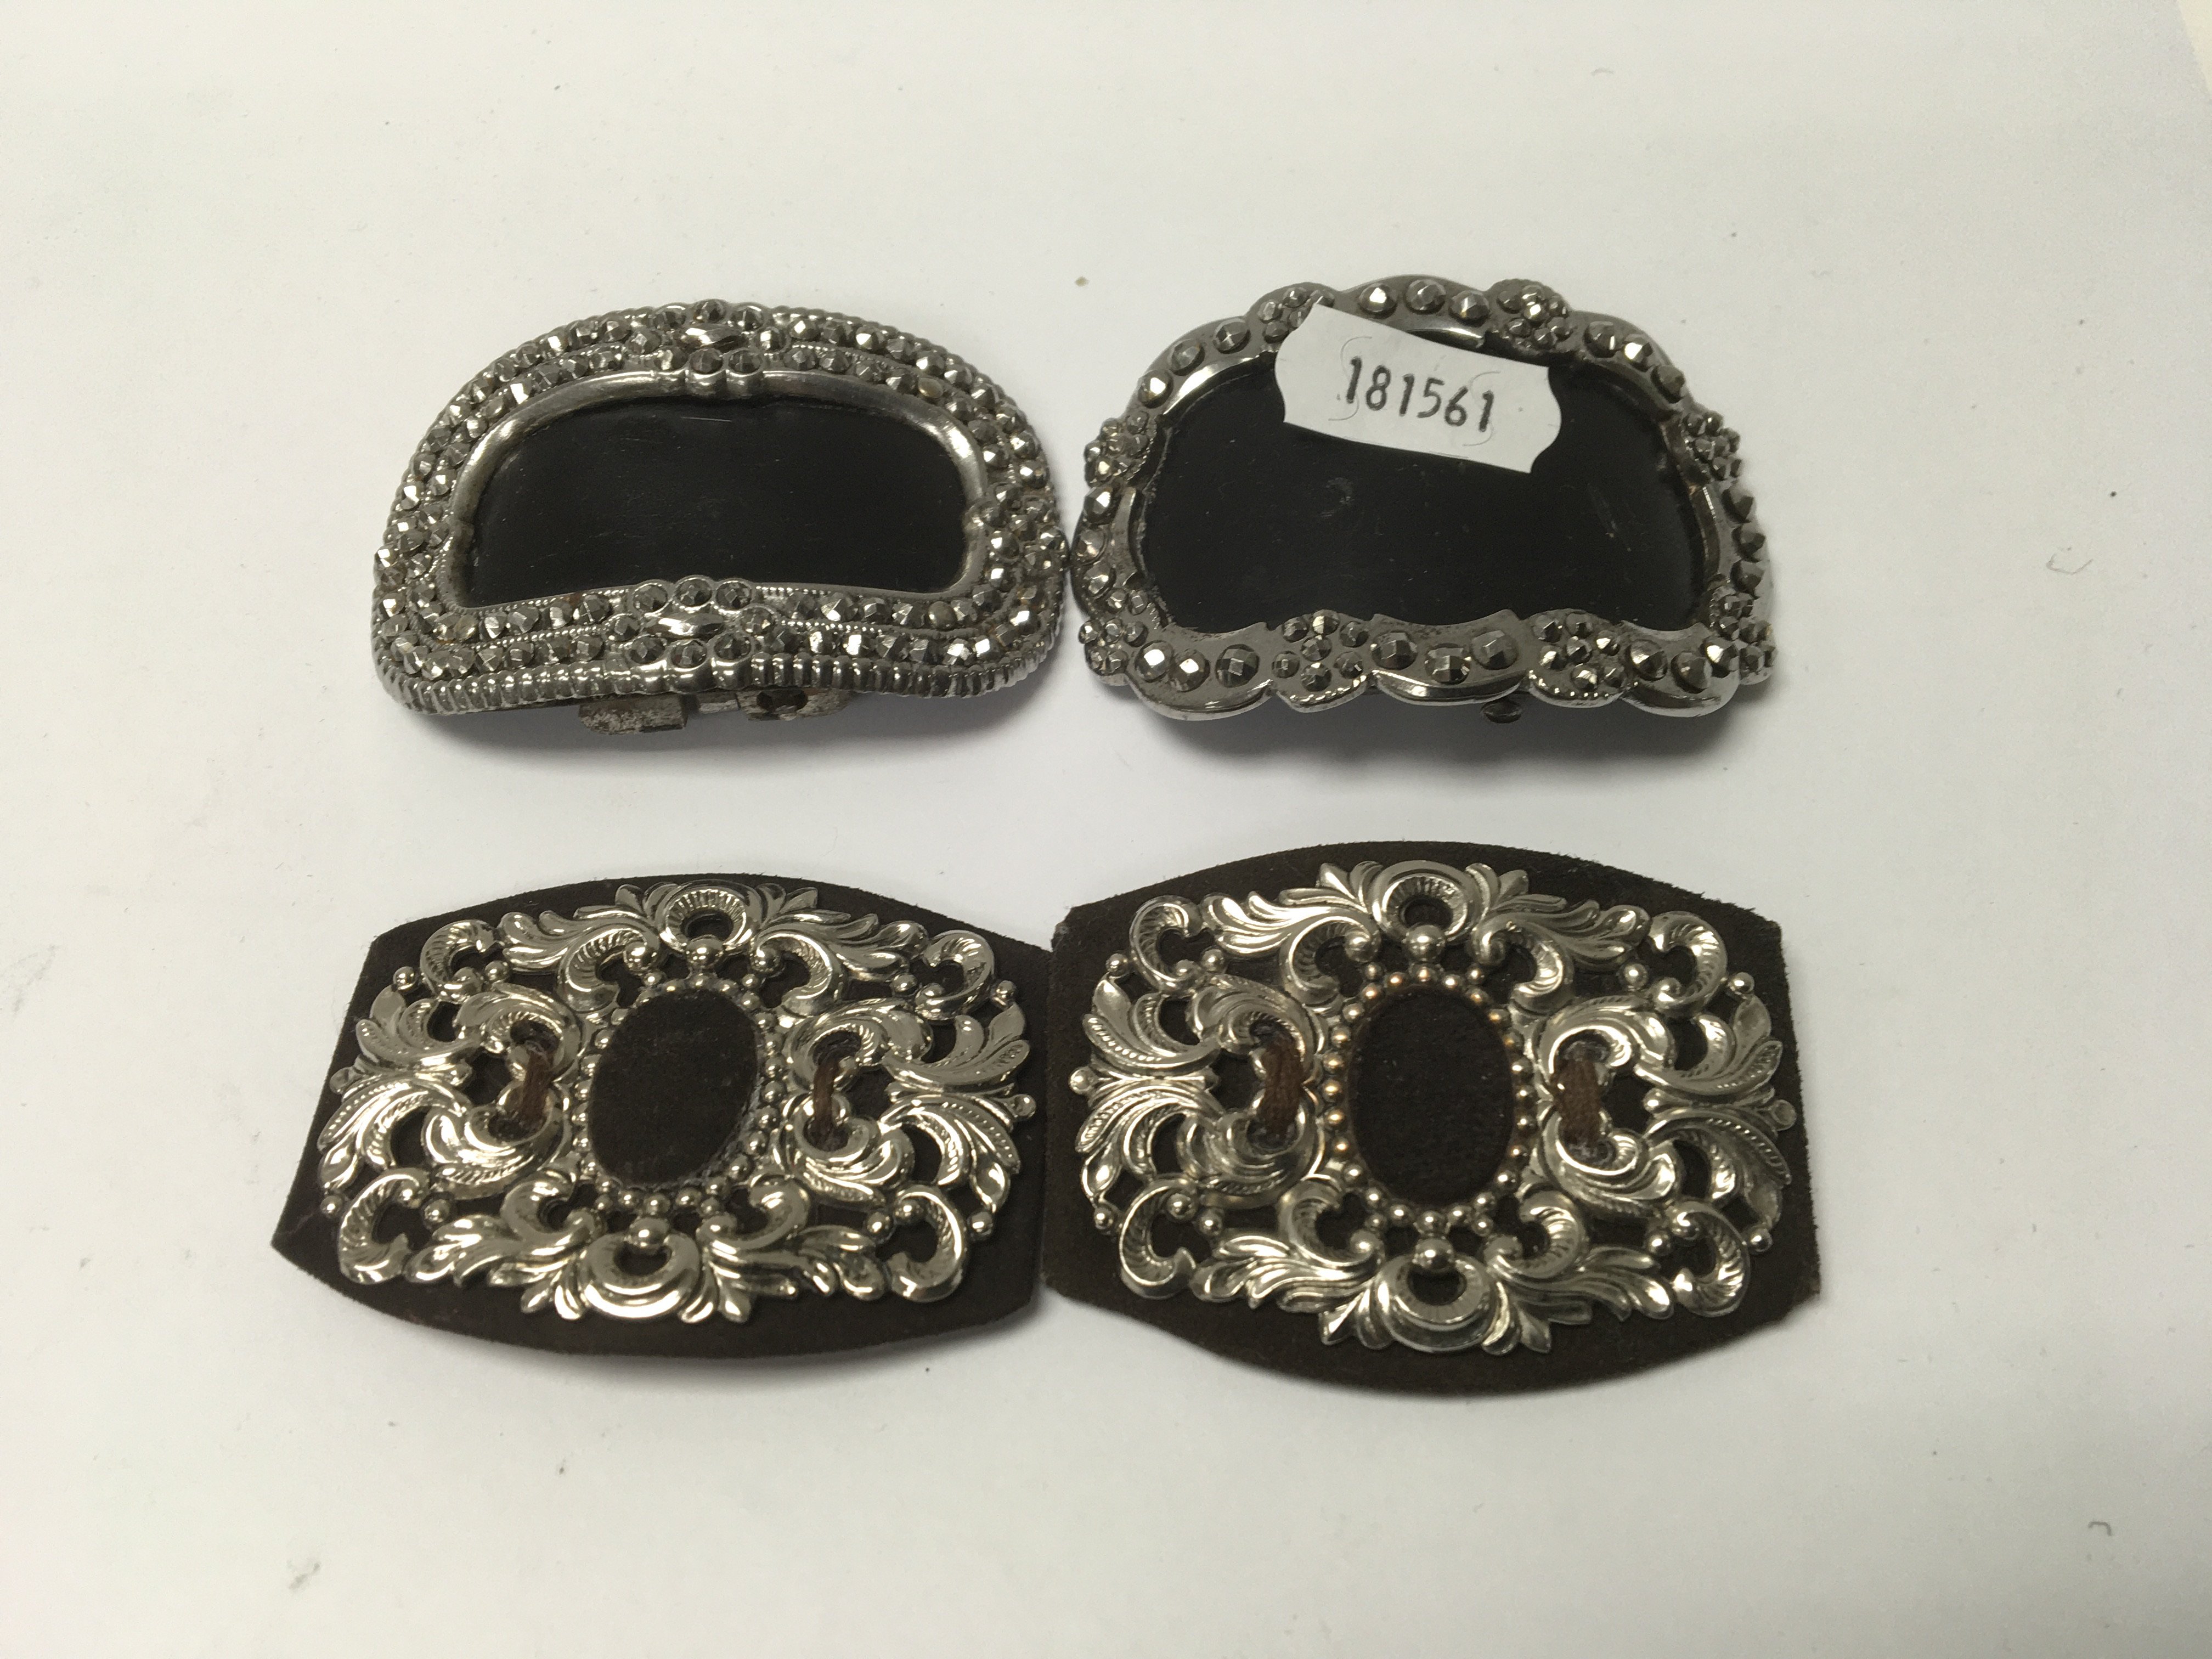 A pair of French white metal shoe buckles and two